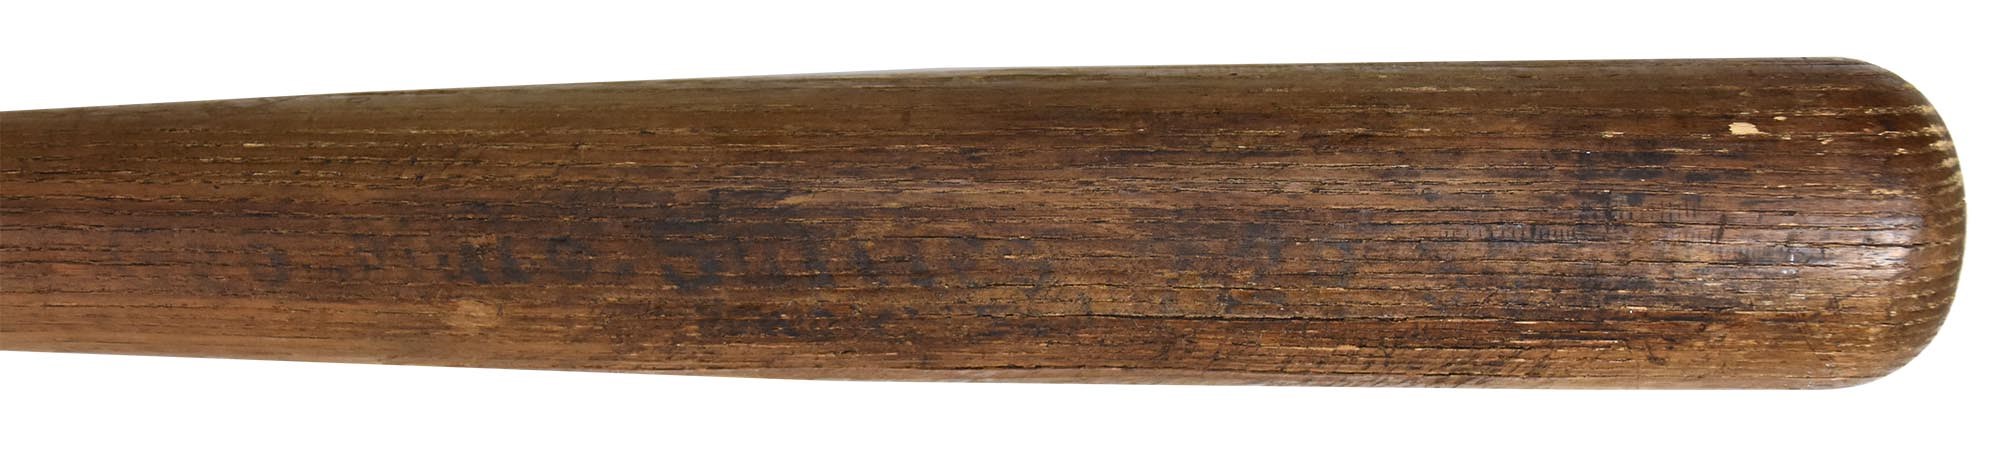 - 1937 George “Mule” Suttles Game Used Bat - Only Known Bat of this Negro Leaguer & HOFer (PSA/DNA)